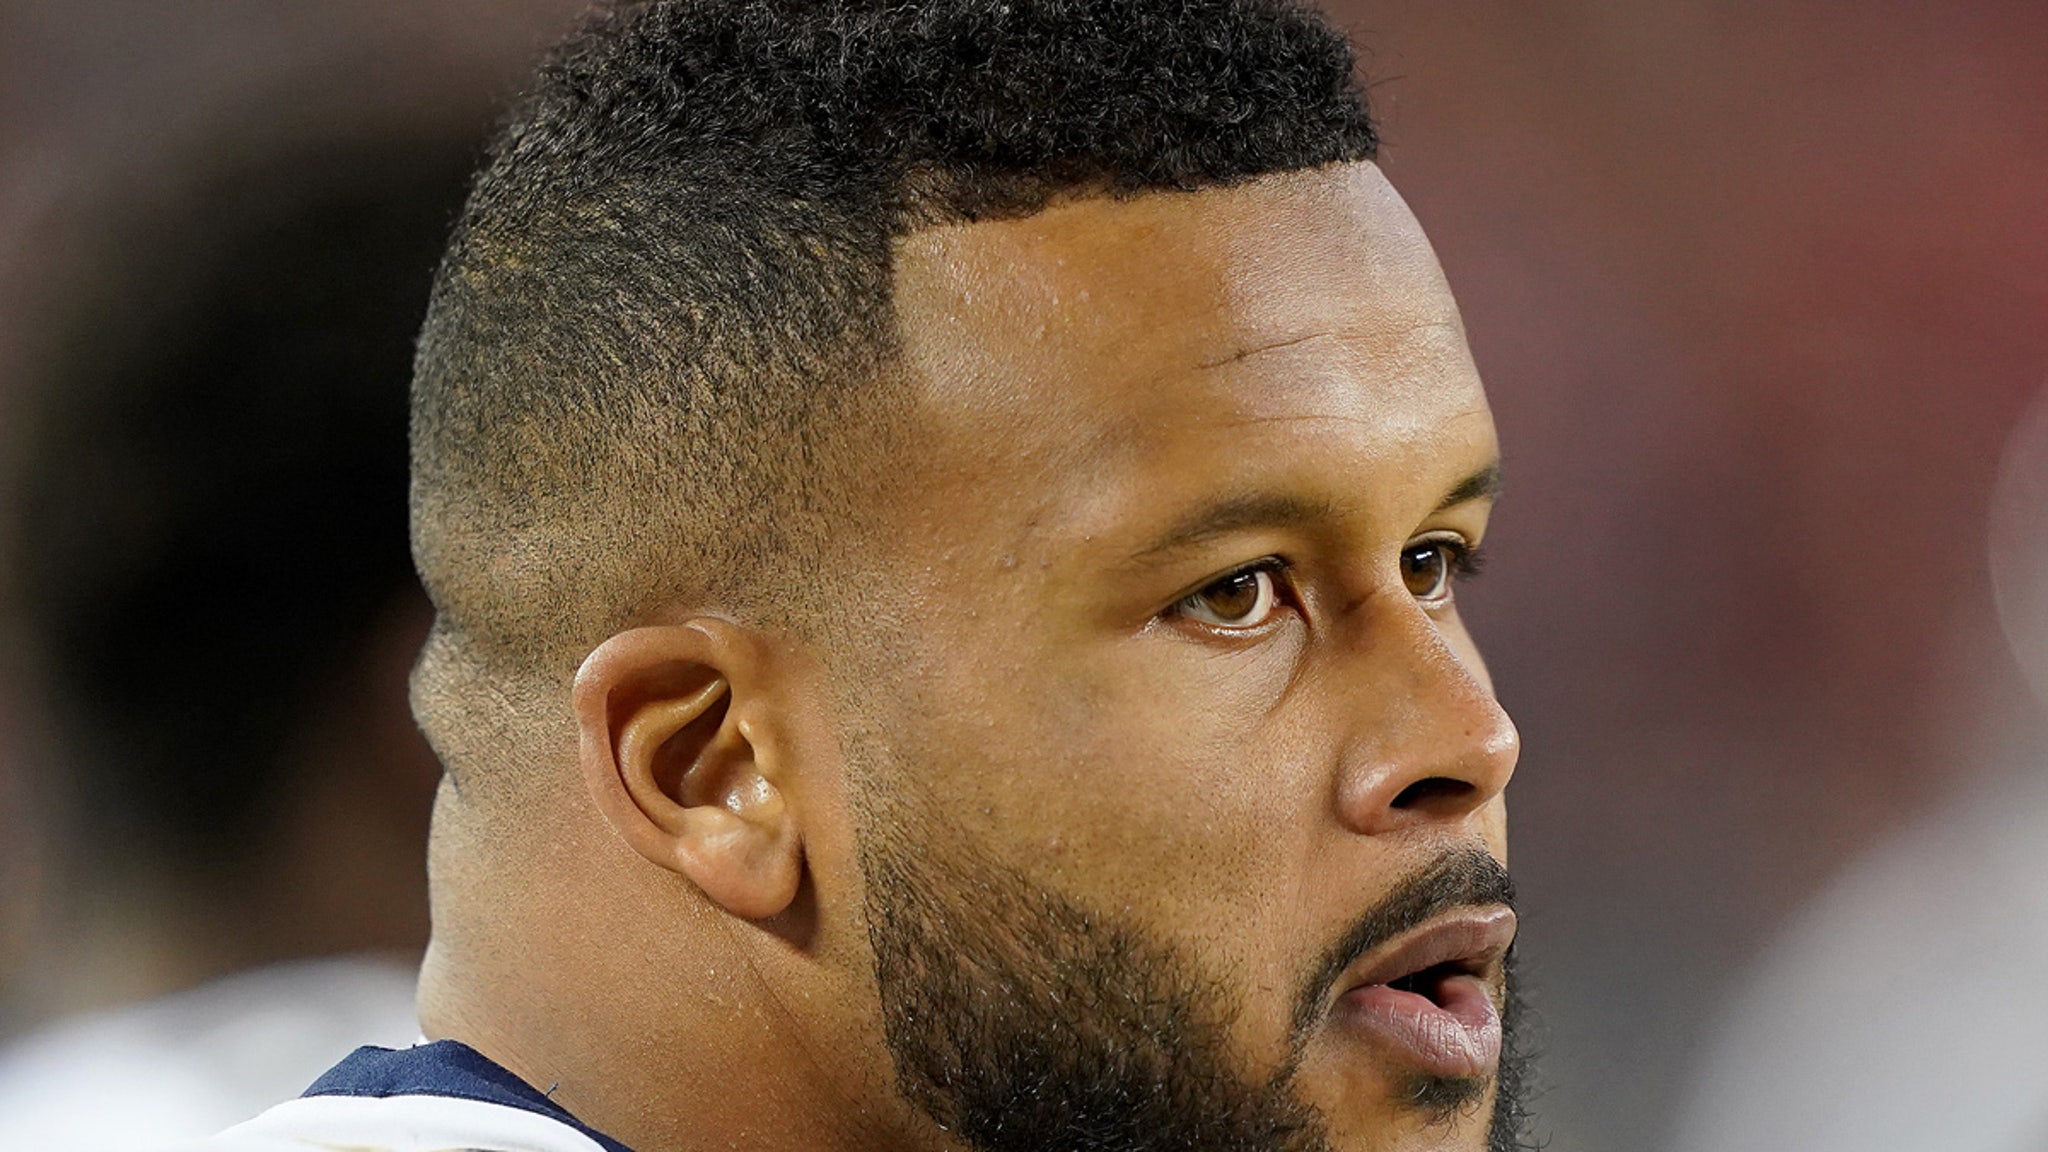 Aaron Donald’s surveillance video shows the NFL star attacked with a bottle, lawyers claim